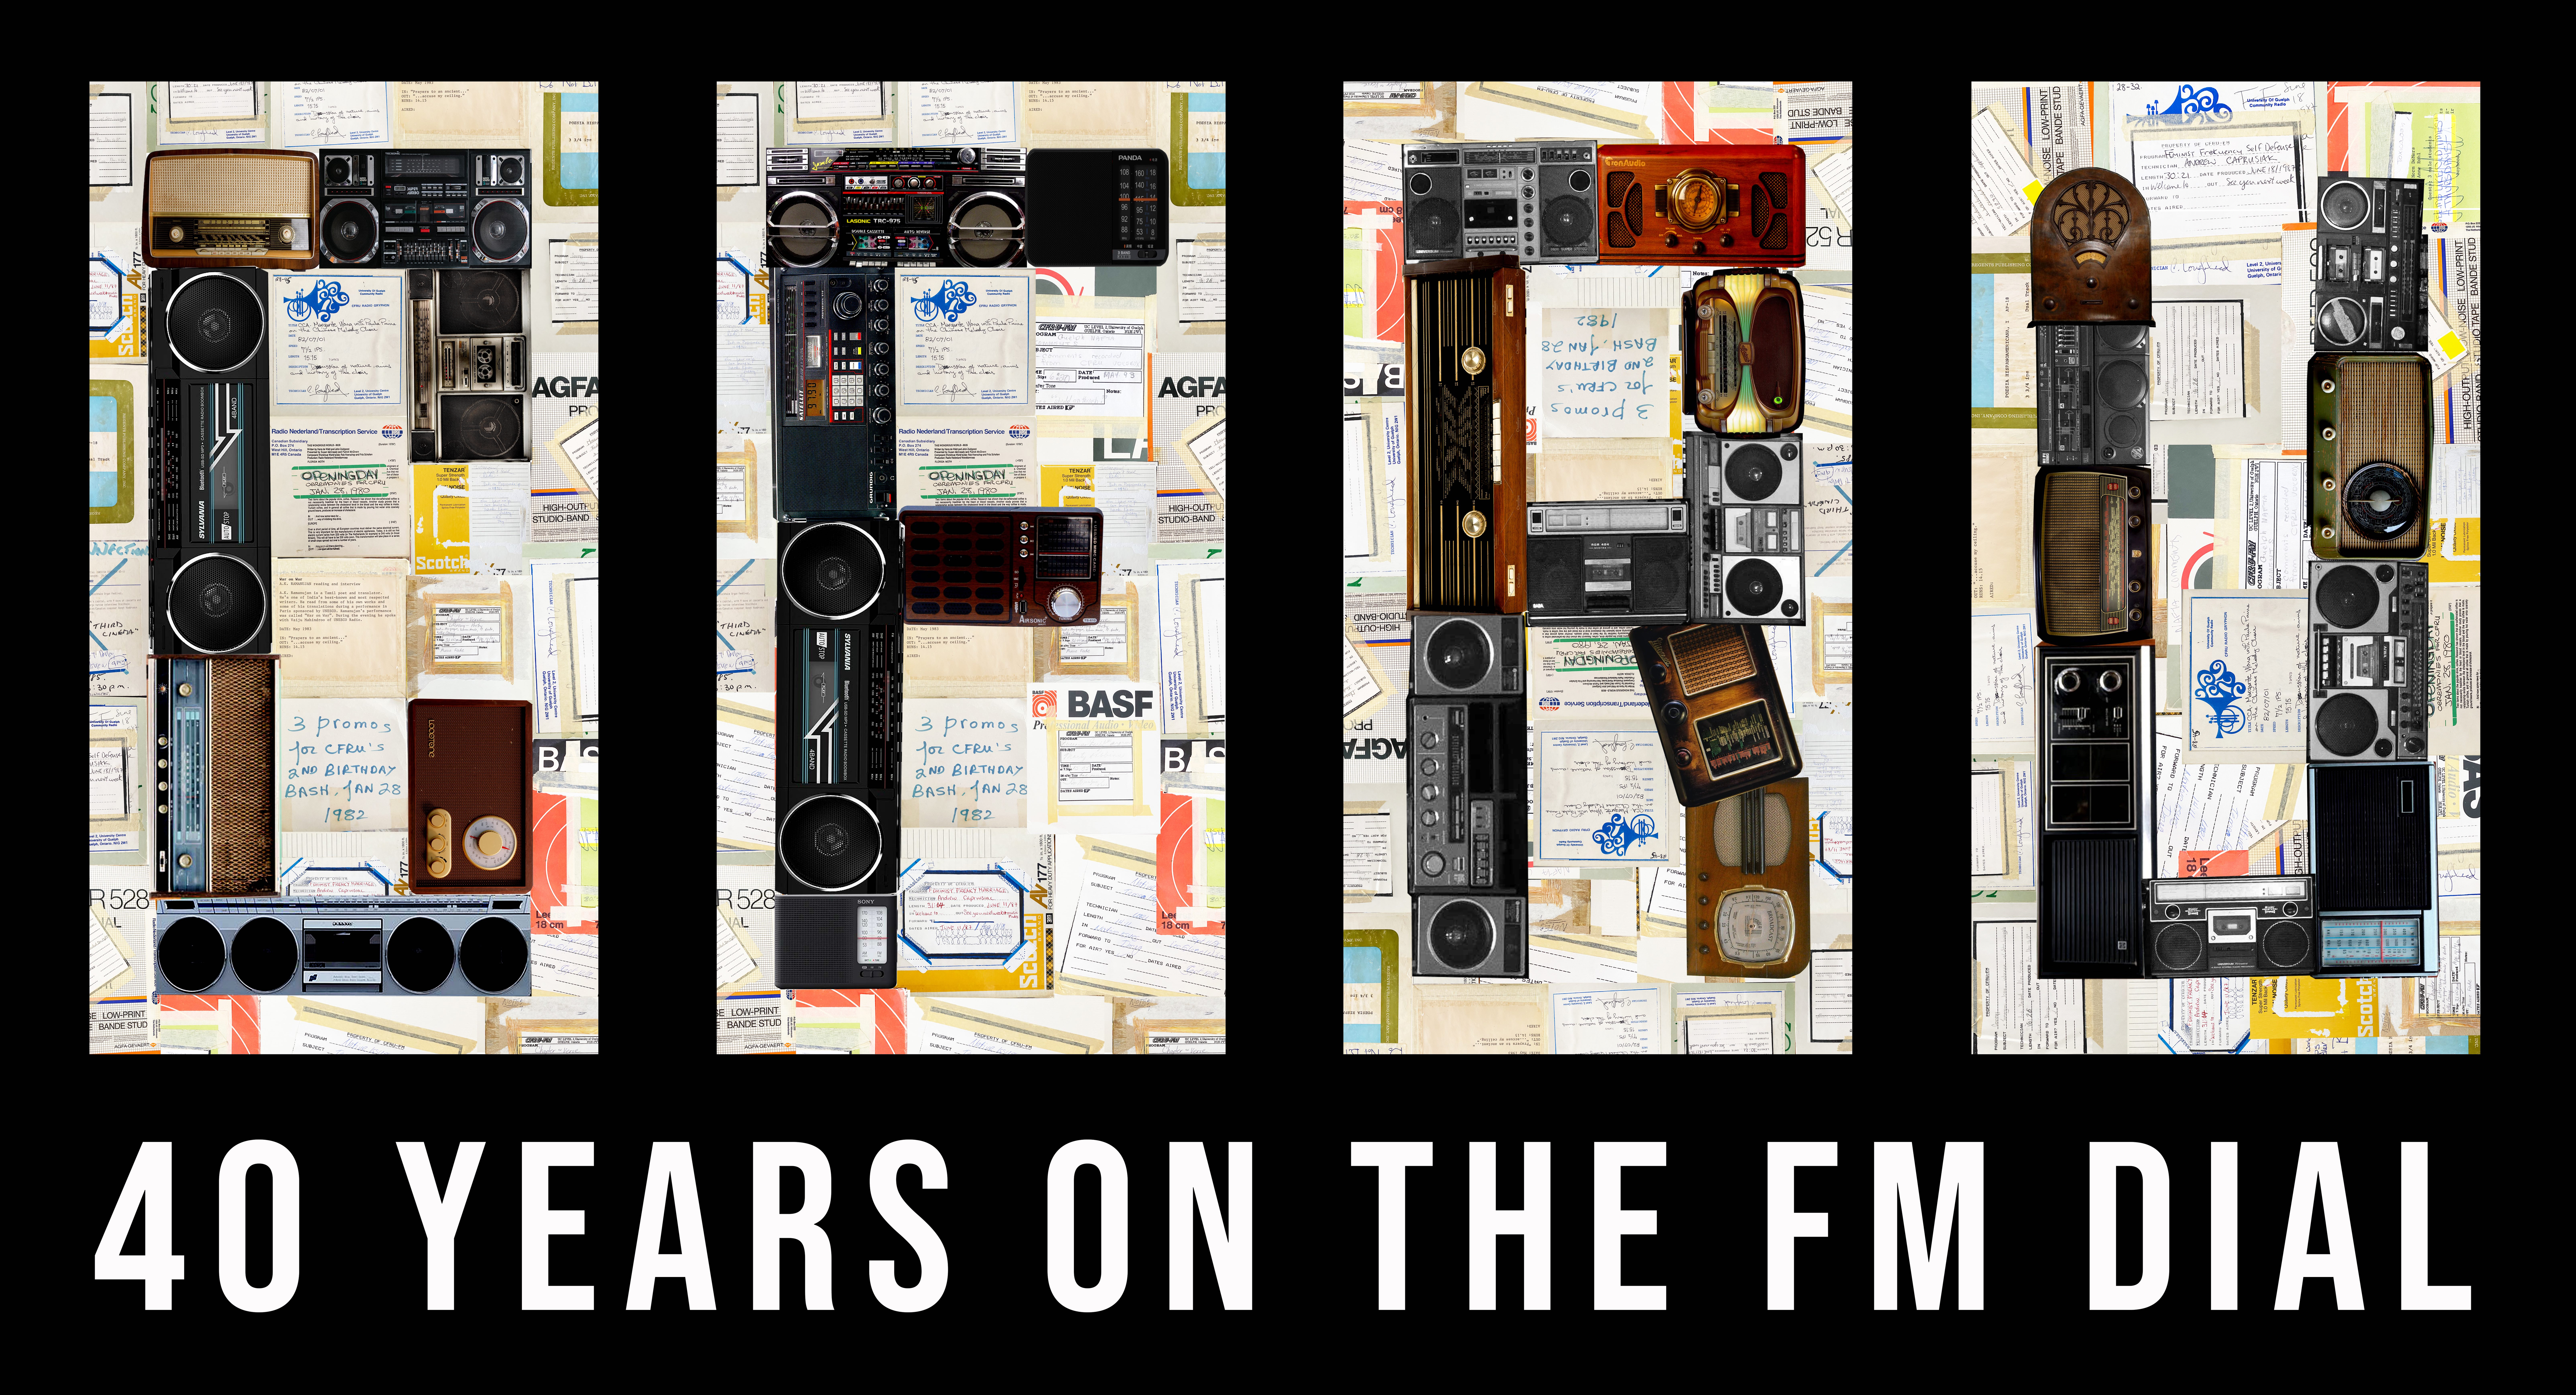 CFRU 40 Years on the FM Dial title graphic